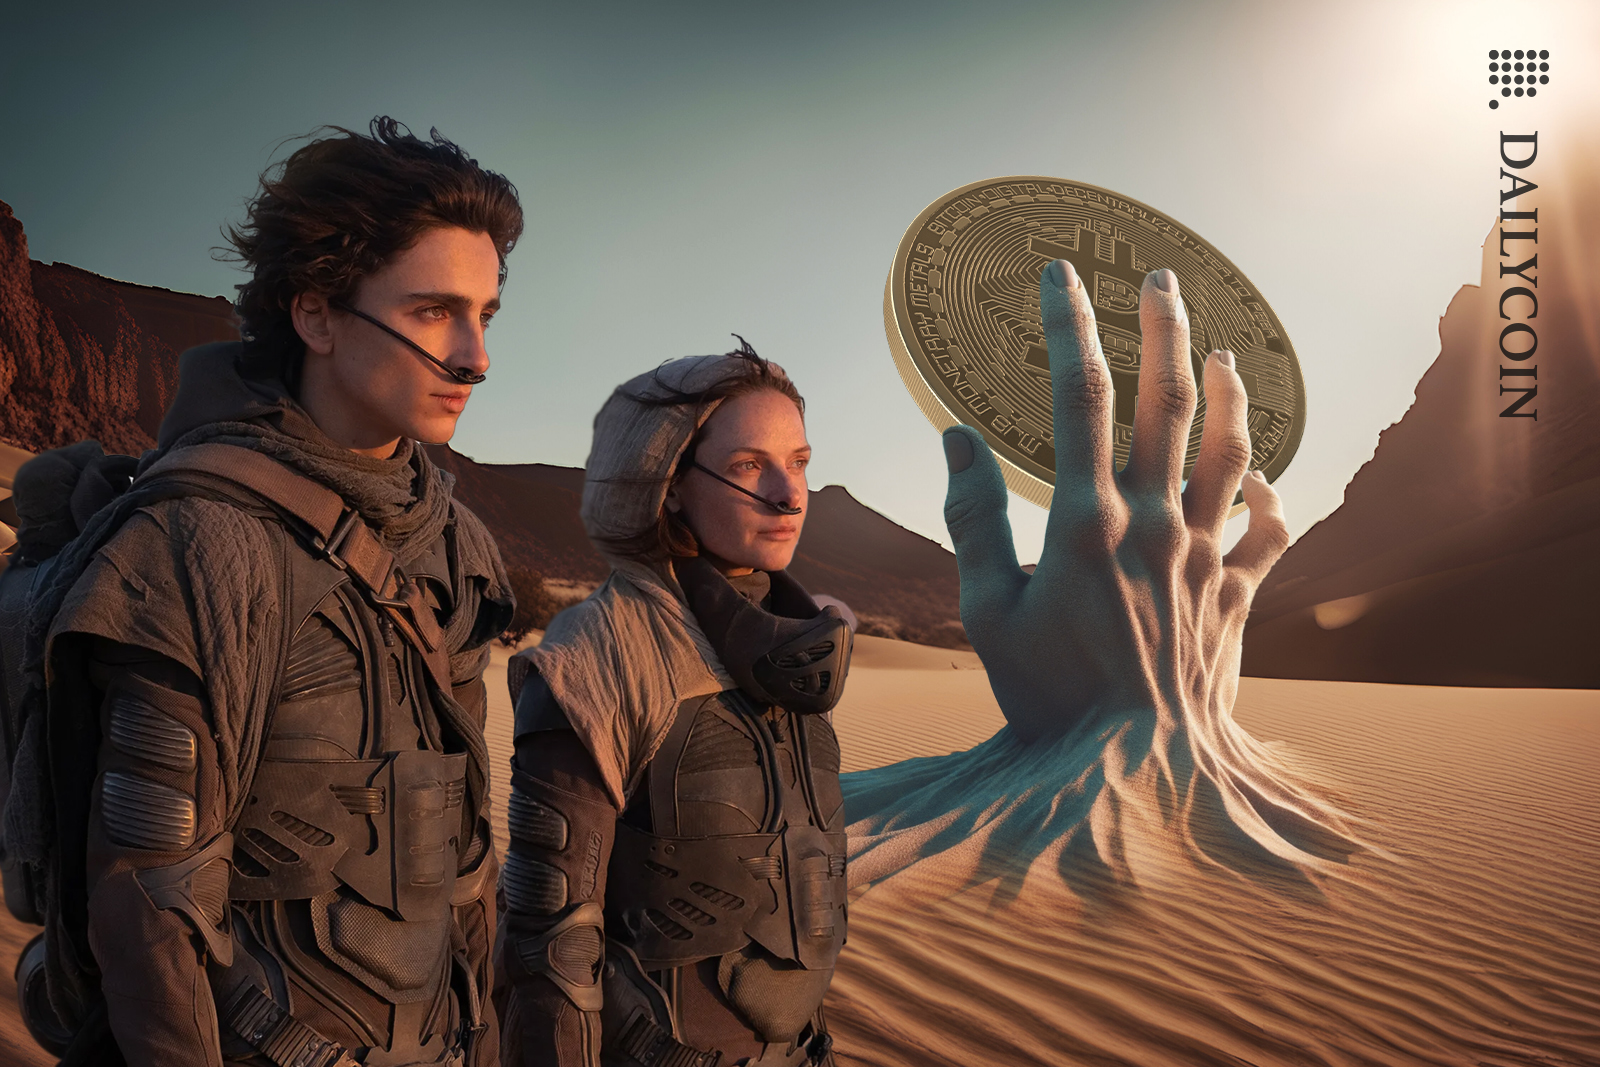 In the Dune part two movie a hand made of sand trying to catch a bitcoin going into space.